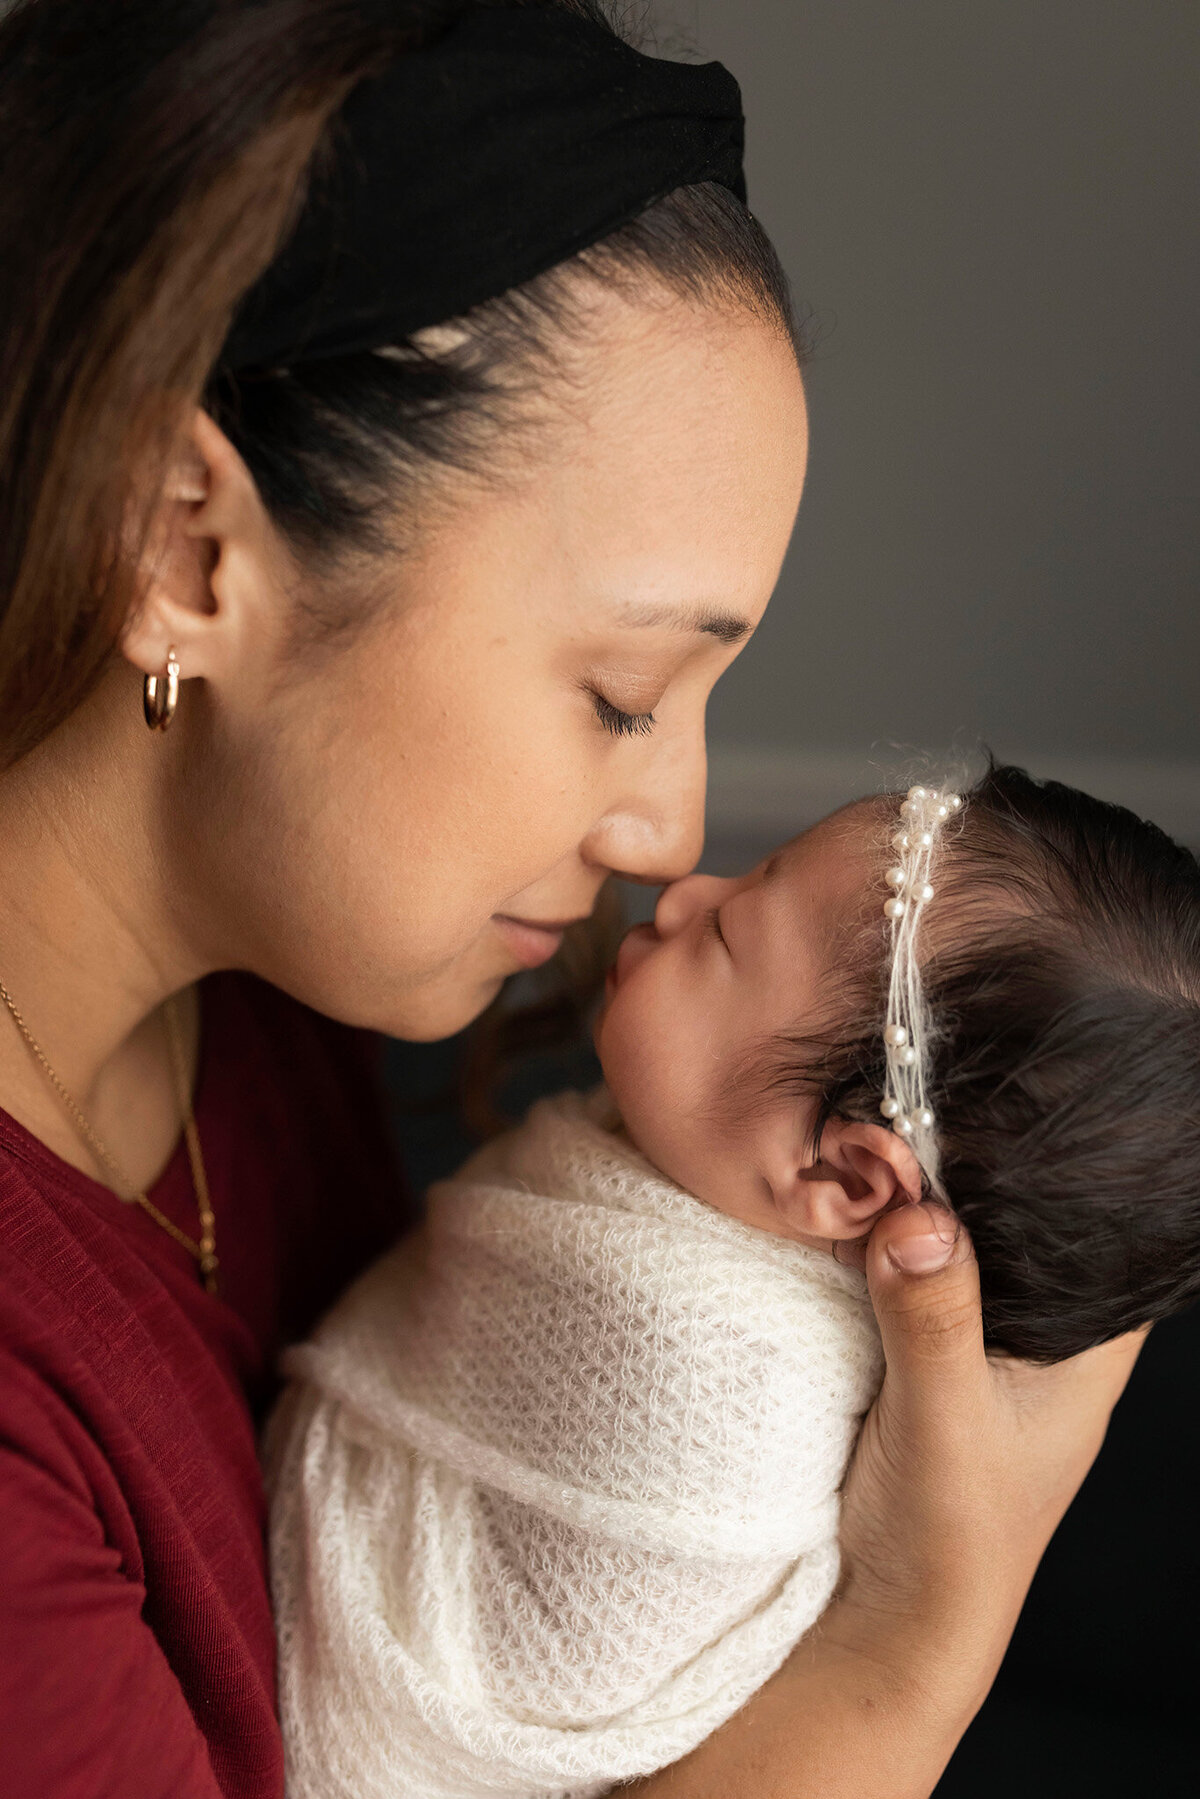 NJ Baby Photographer captures mom kissing her baby